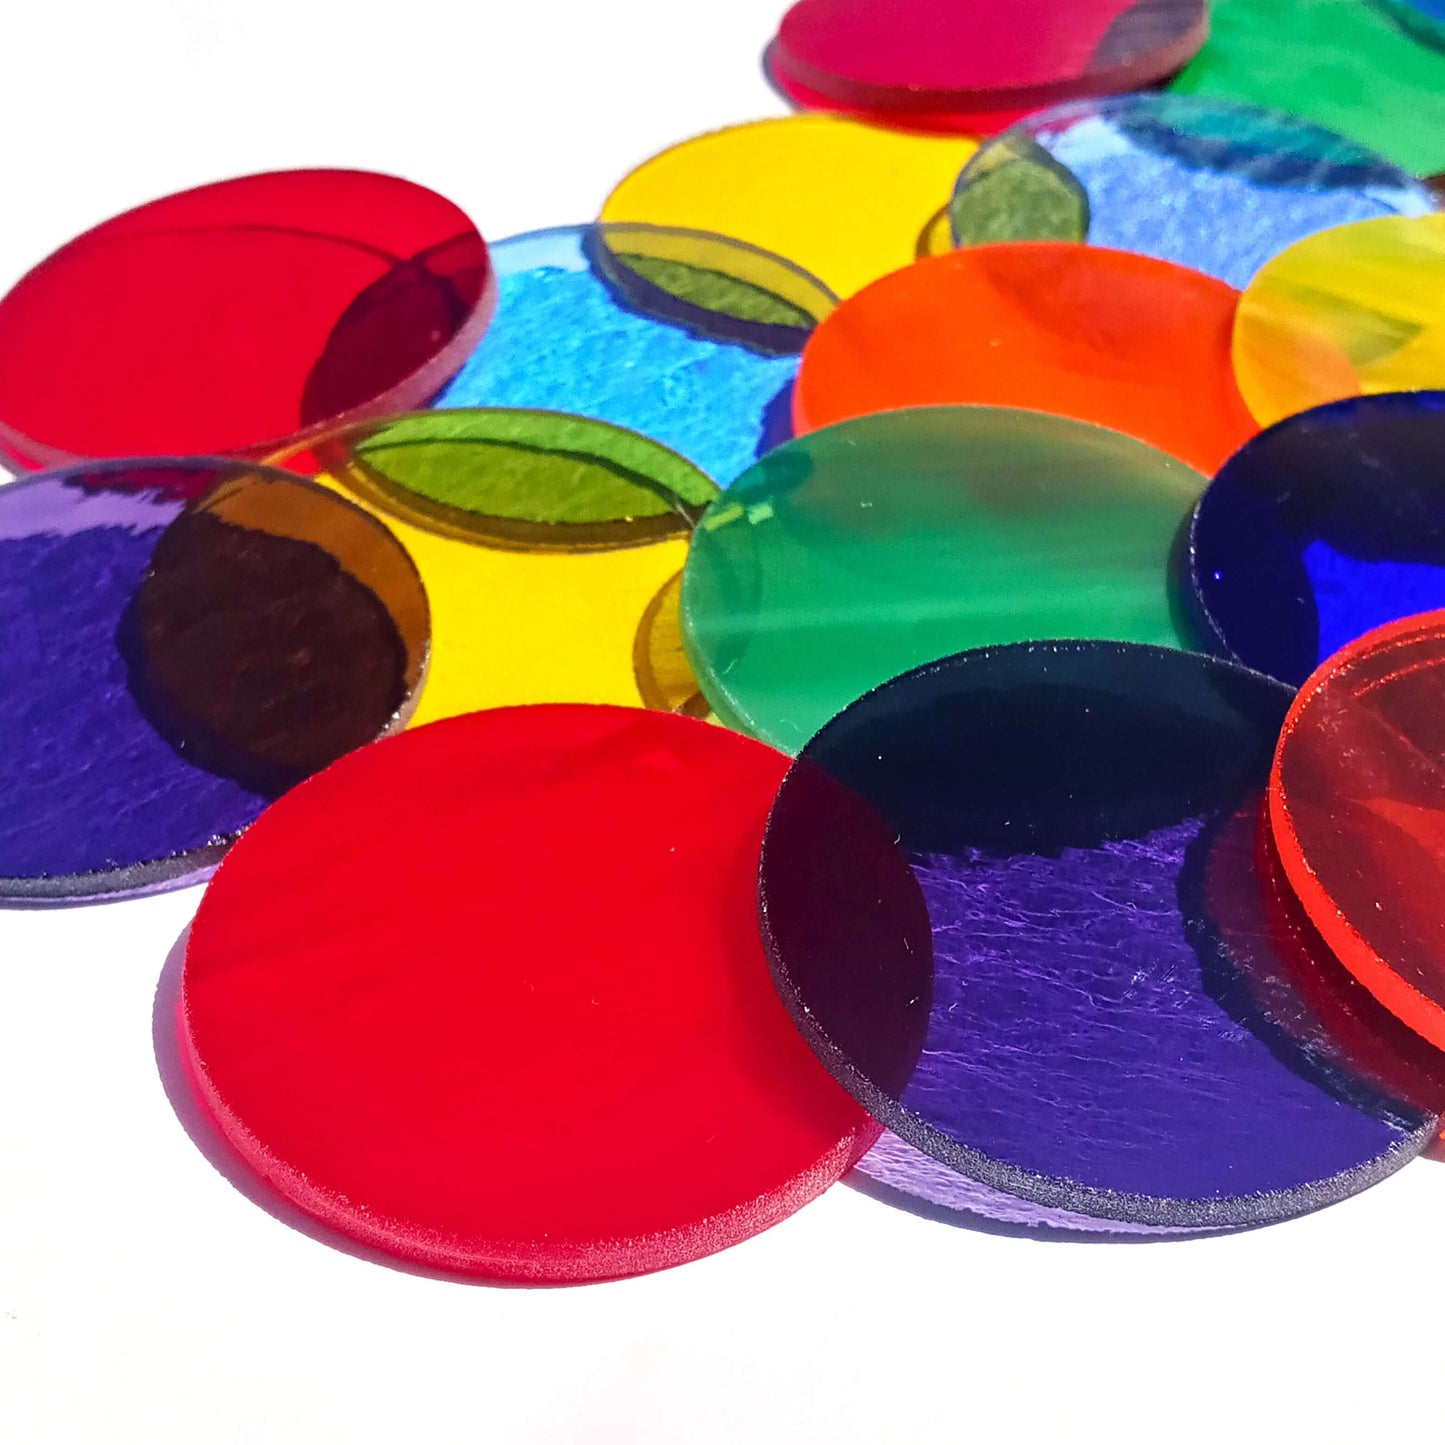 Precut Stained Glass Circles, 2" Diameter Glass Circles in Assorted Colors, Glass Art Supplies